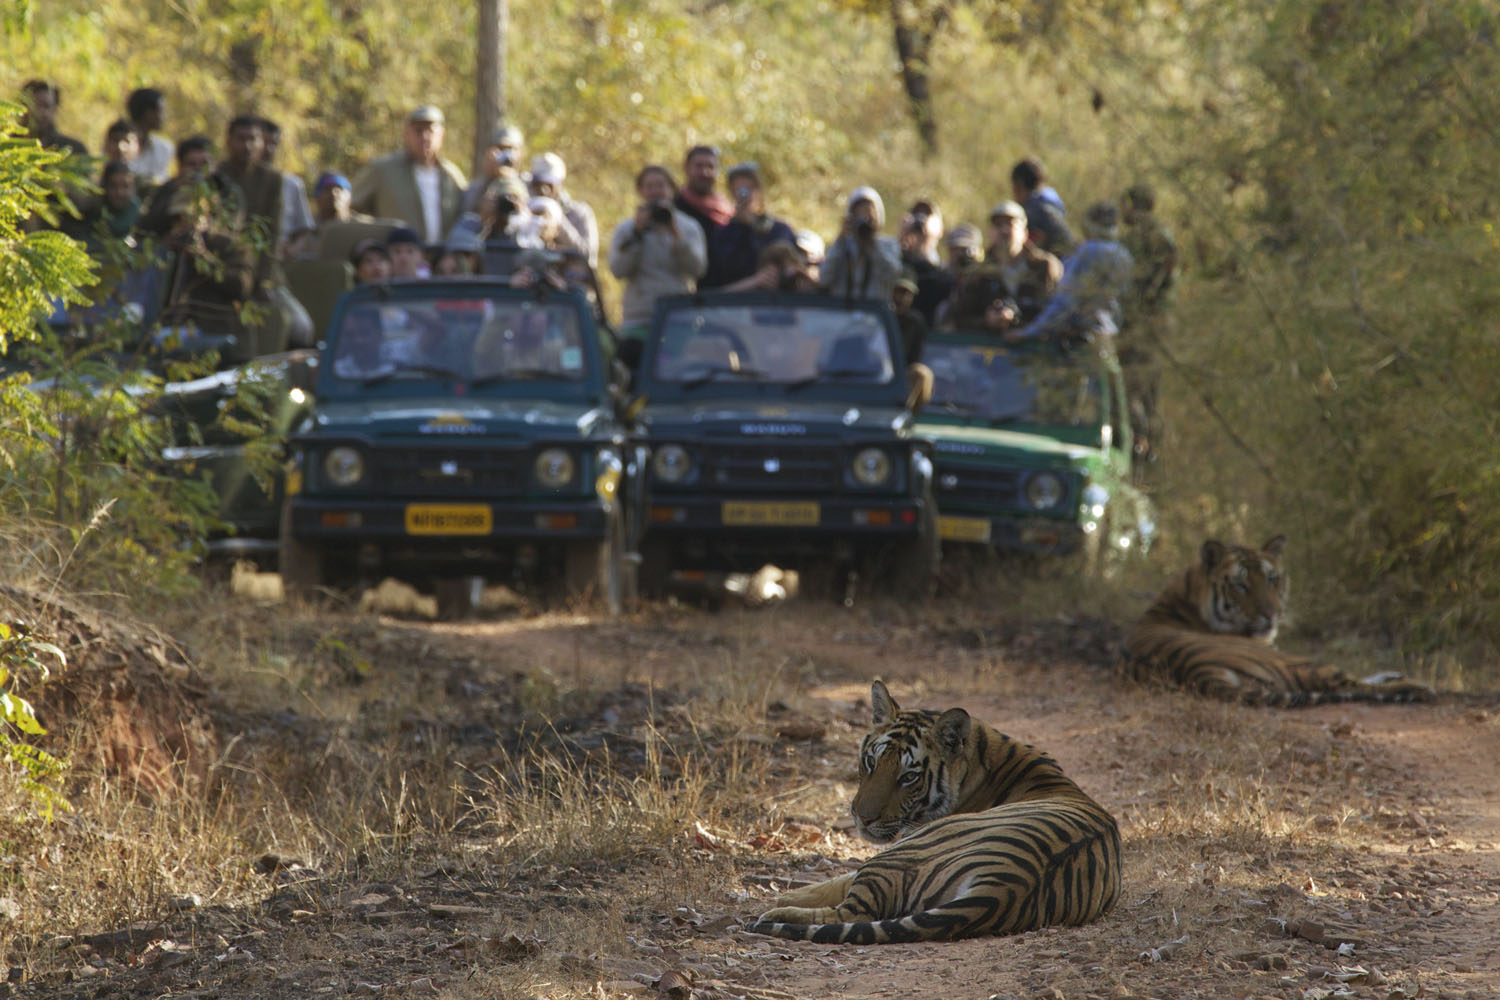 A crowd of tourists  photographing two tiger cubs sitting on a road inside Bandhavgarh National Park, India. (Steve Winter&mdash;National Geographic/Getty Images)